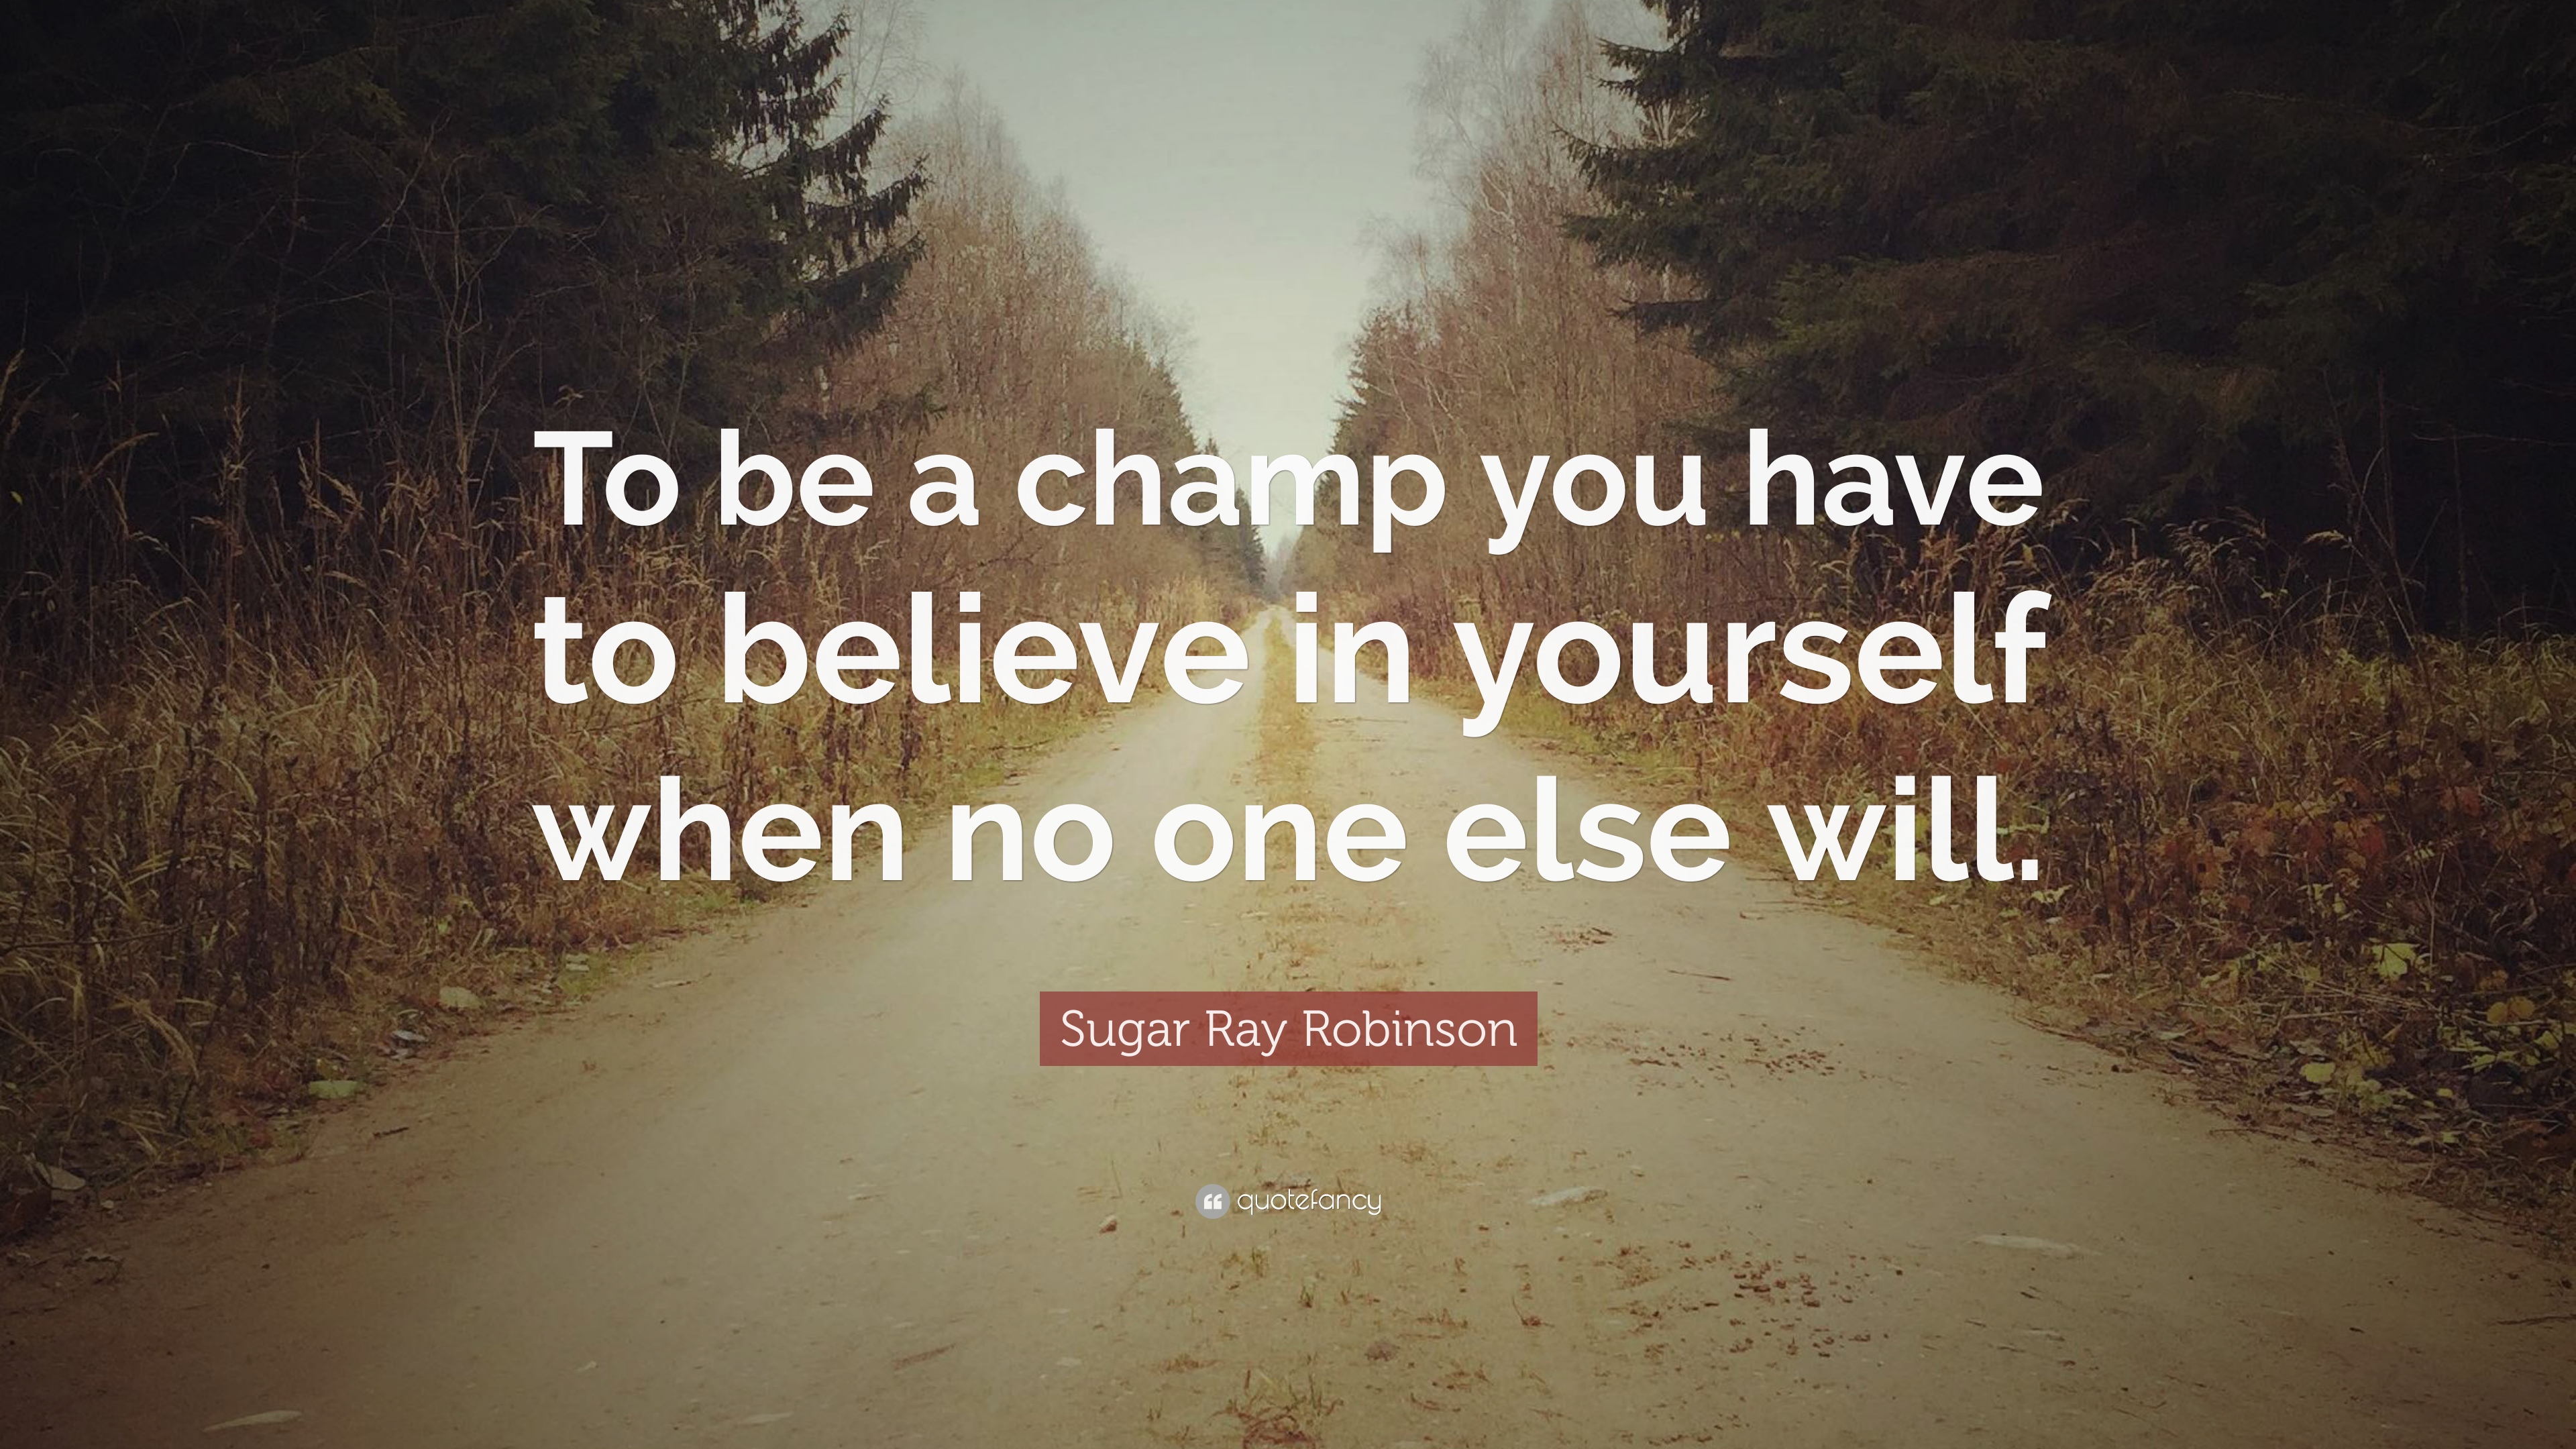 Sugar Ray Robinson Quote: “To be a champ you have to believe